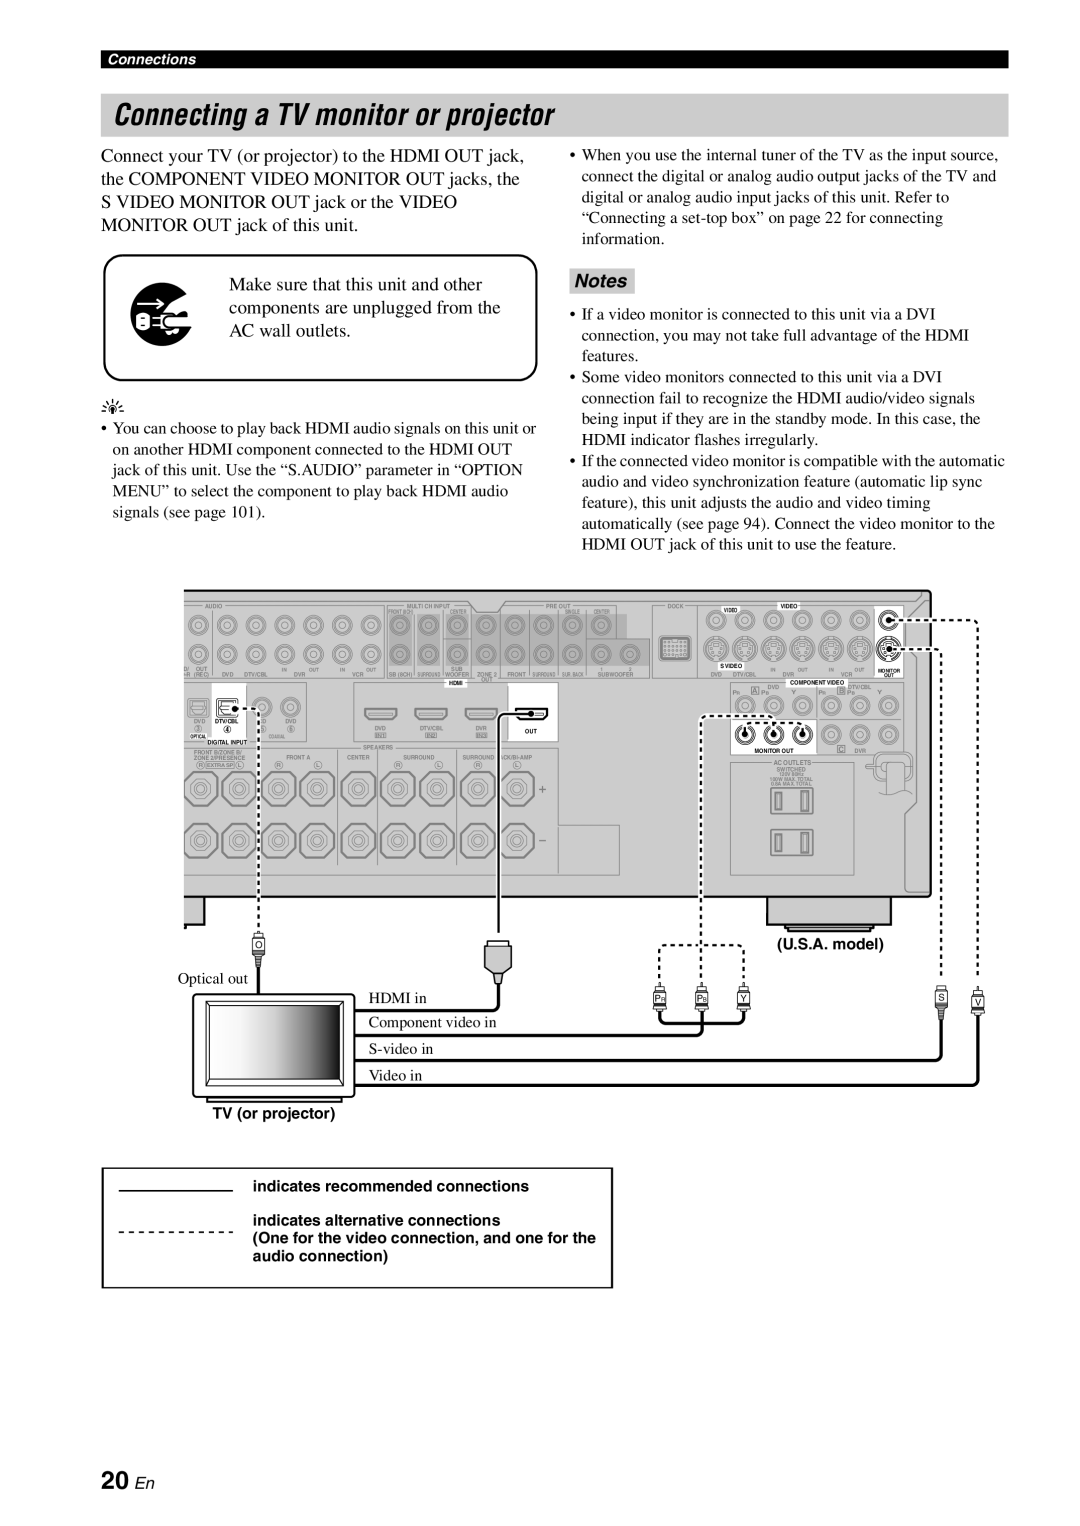 Yamaha RX-V863 owner manual Connecting a TV monitor or projector, 20 En, Notes 